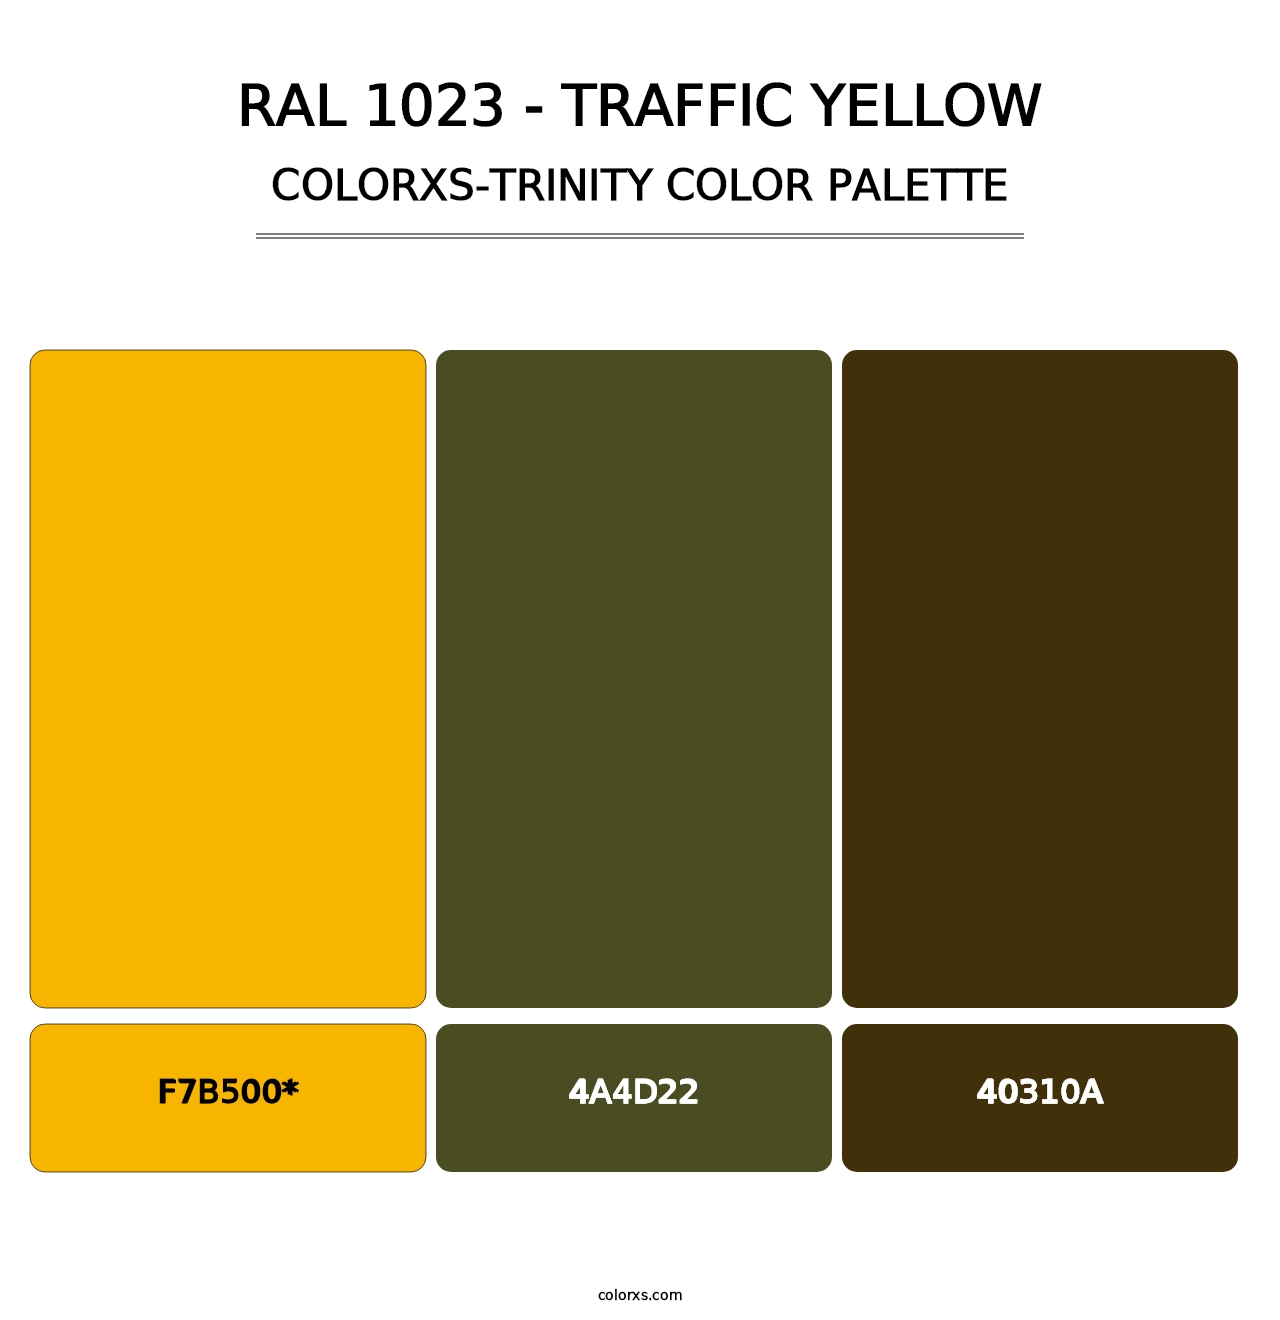 RAL 1023 - Traffic Yellow - Colorxs Trinity Palette